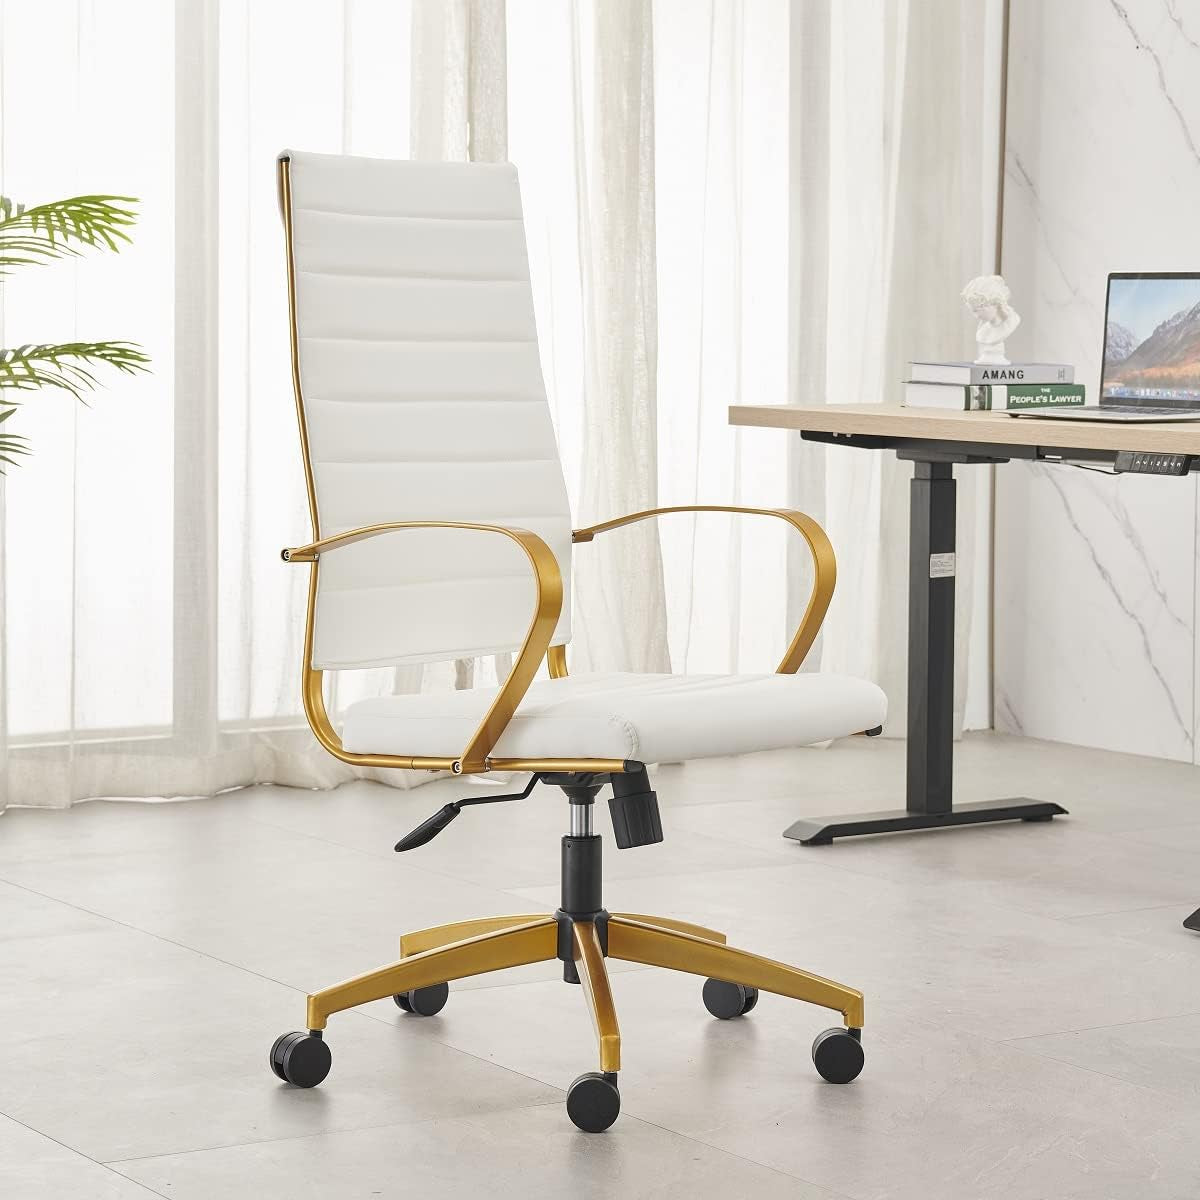 Gold Office Chair Executive Office Chair Ergonomic High Back Conference Computer Chair with Lumbar Support White Executive Swivel Office Desk Chair 350+Lb 4020 (Gold White)